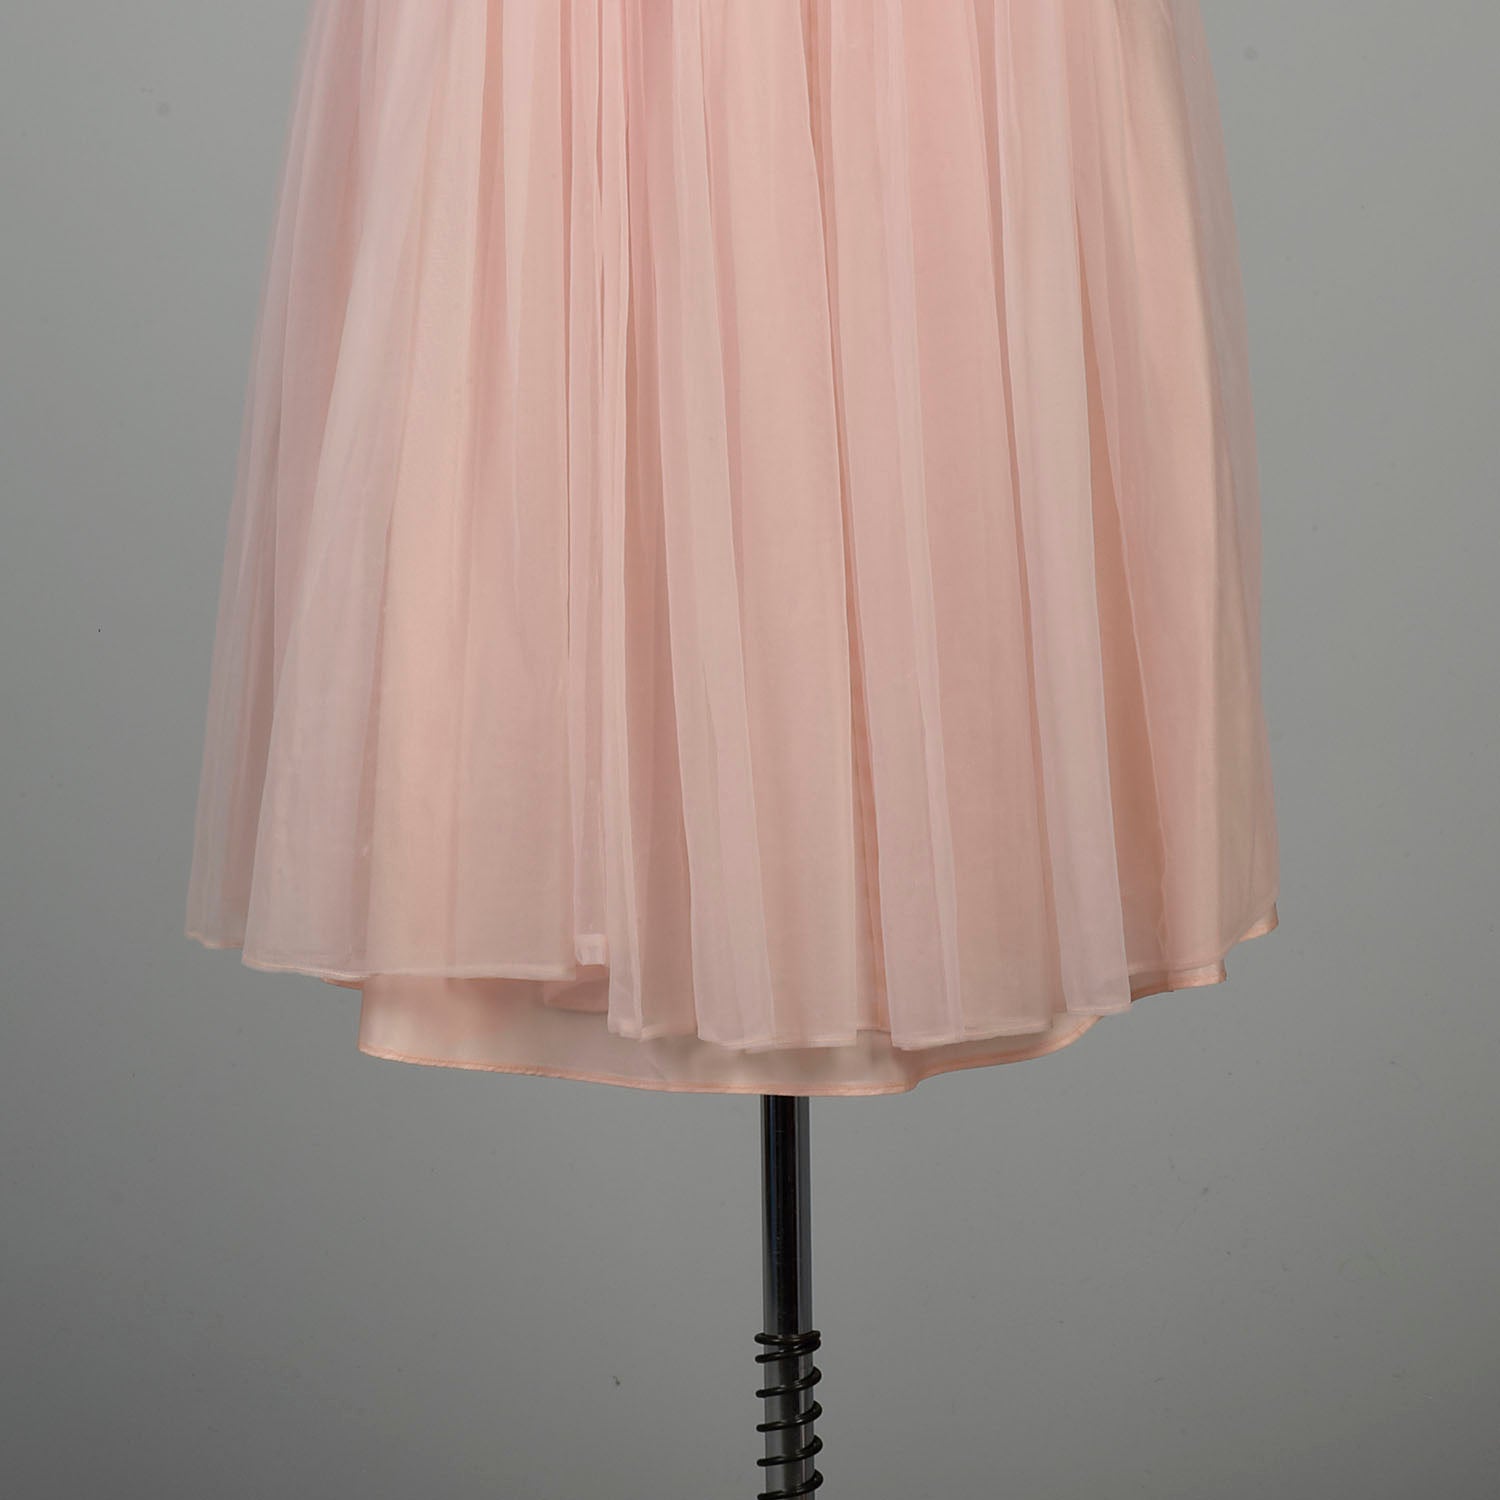 XXS 1950s Pink Party Dress Ruched Barbie Strapless